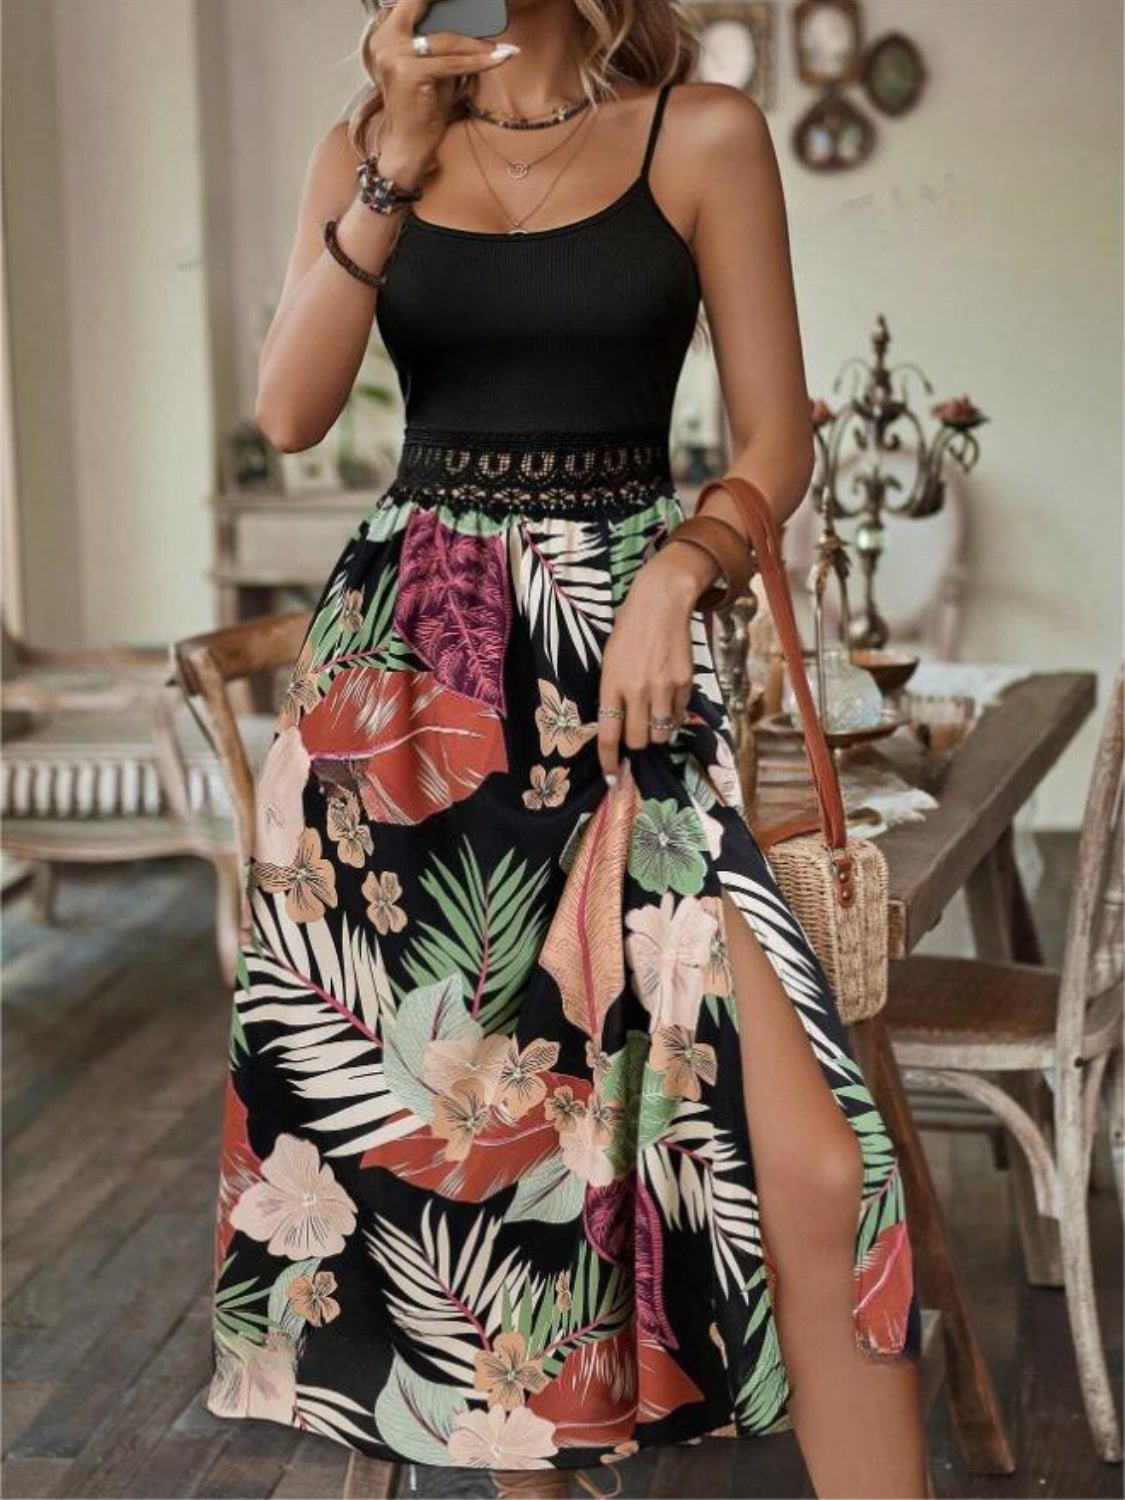 The image is showcasing a Slit Printed Scoop Neck Cami Dress Casual Summer Maxi Dress For women at Mommy & Lino's Closet